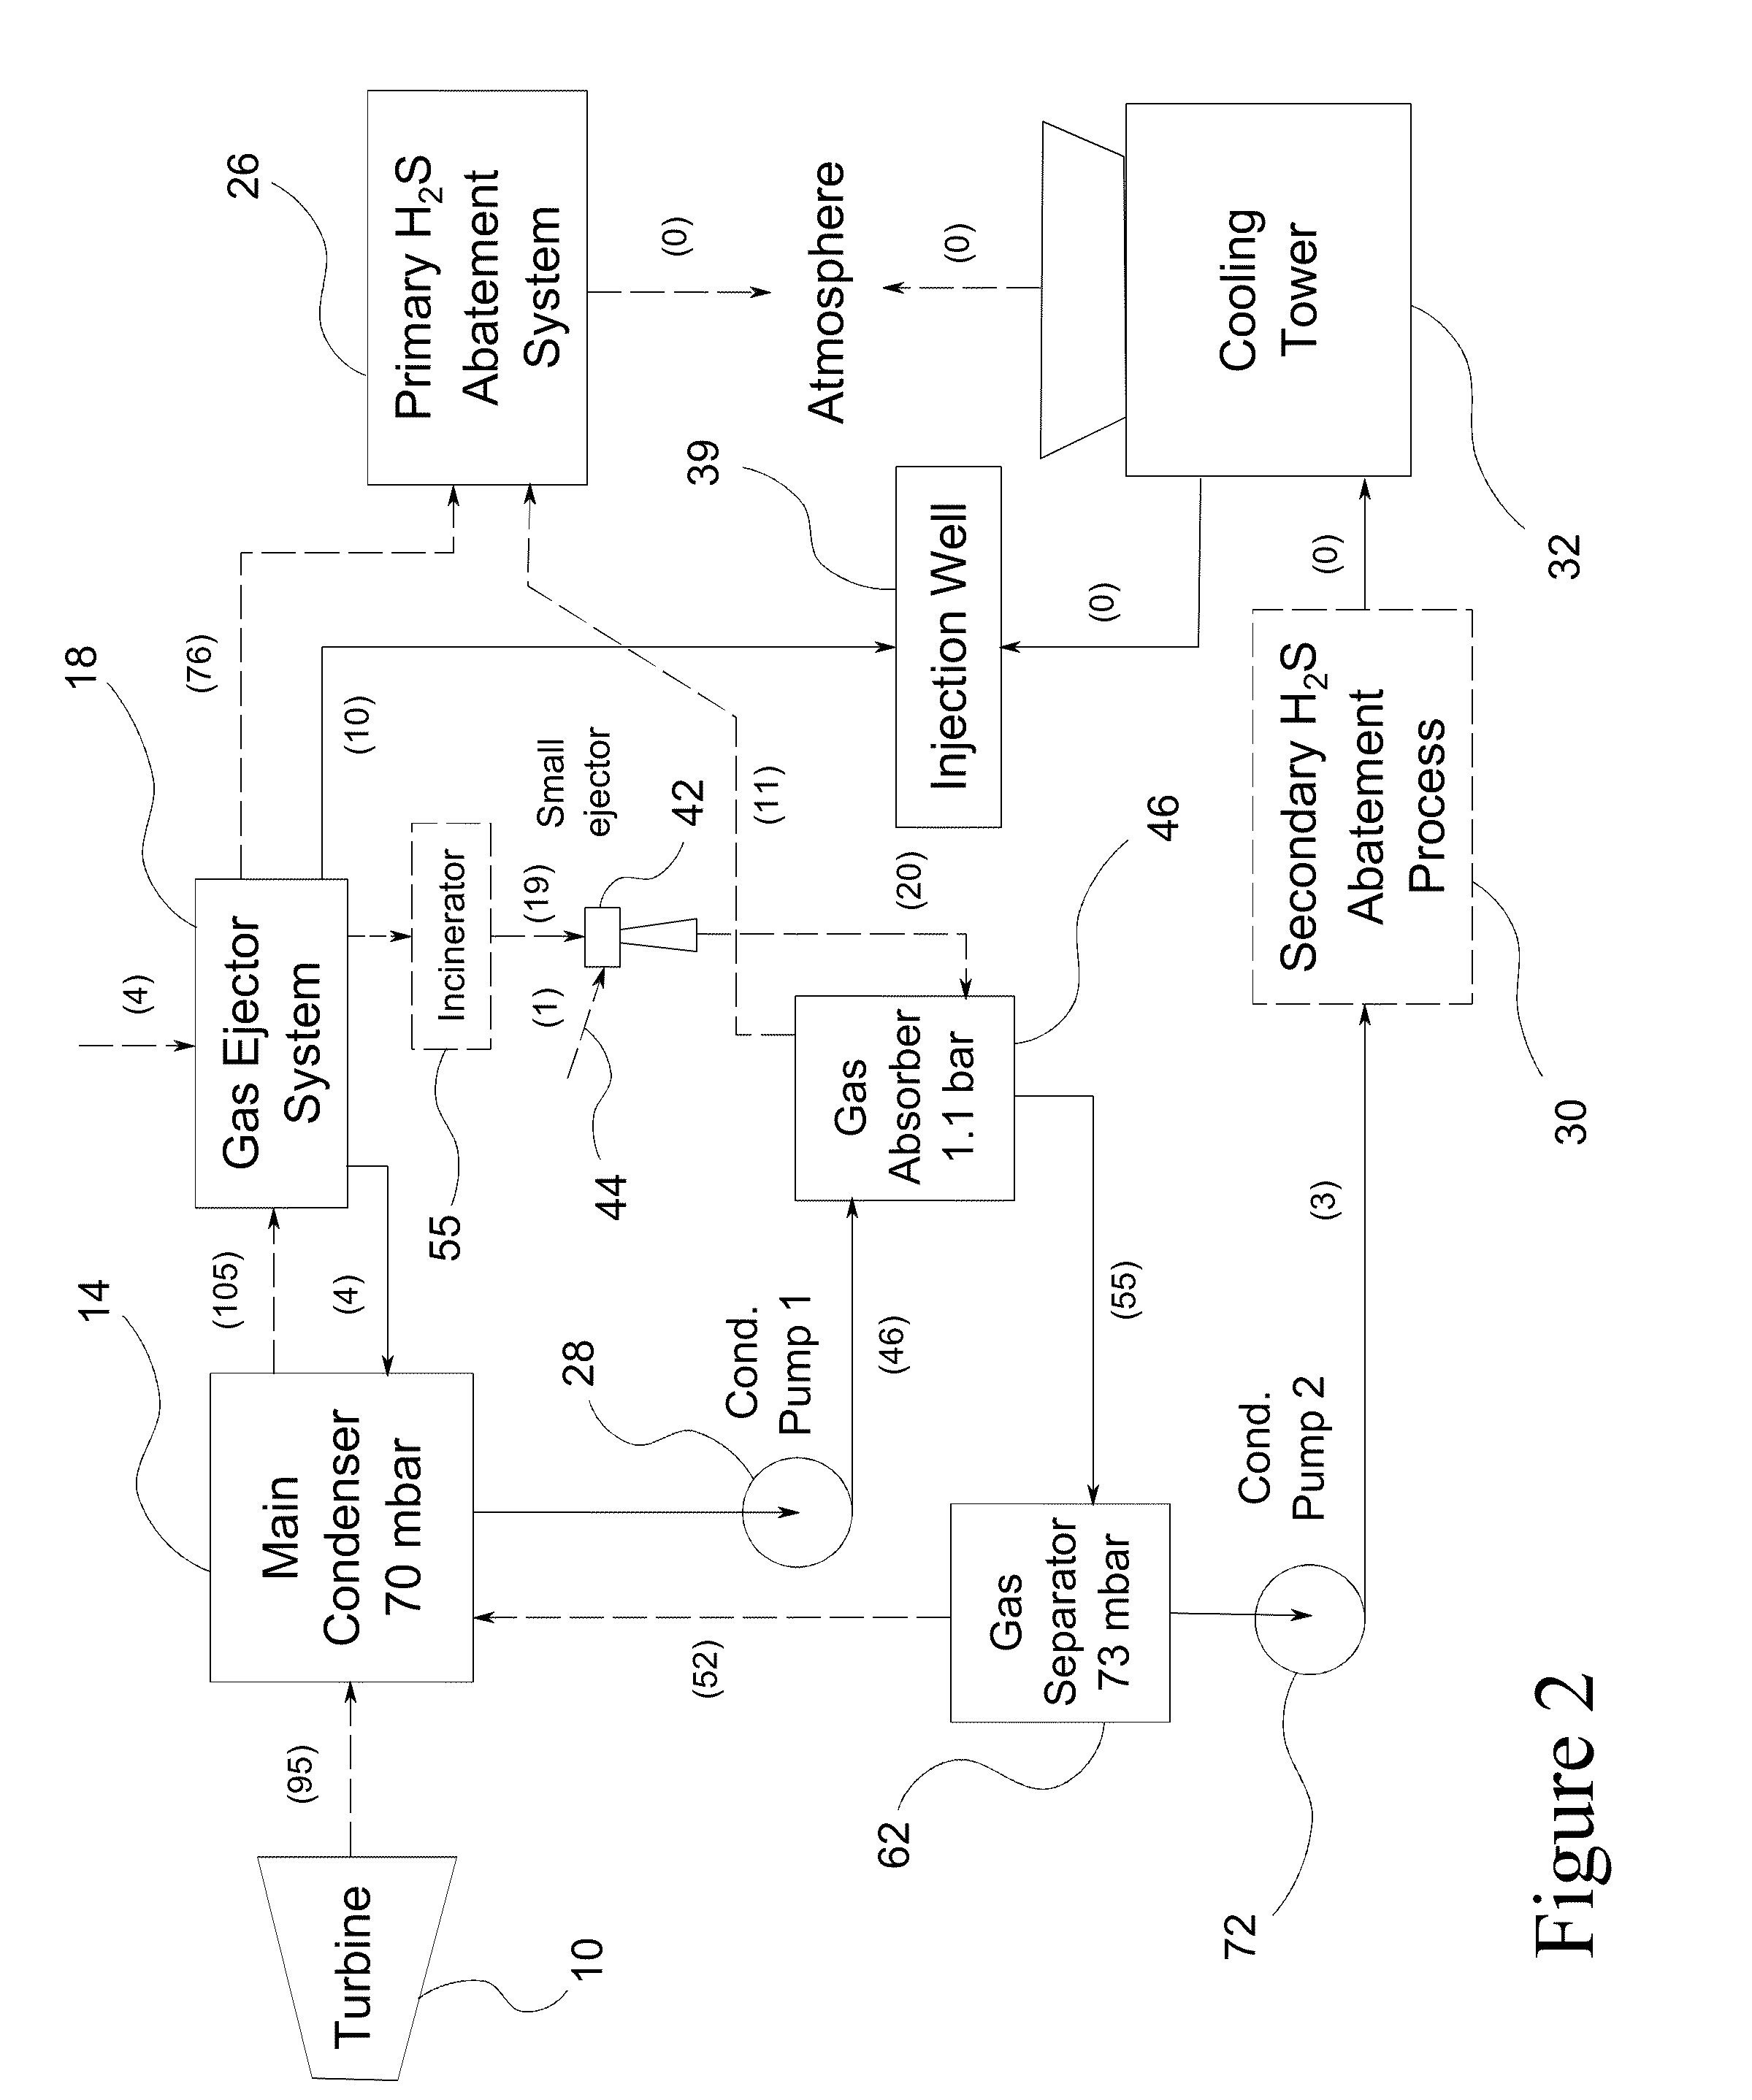 Method and Device to Remove Hydrogen Sulfide from Steam Condensate in a Geothermal Power Generating Unit